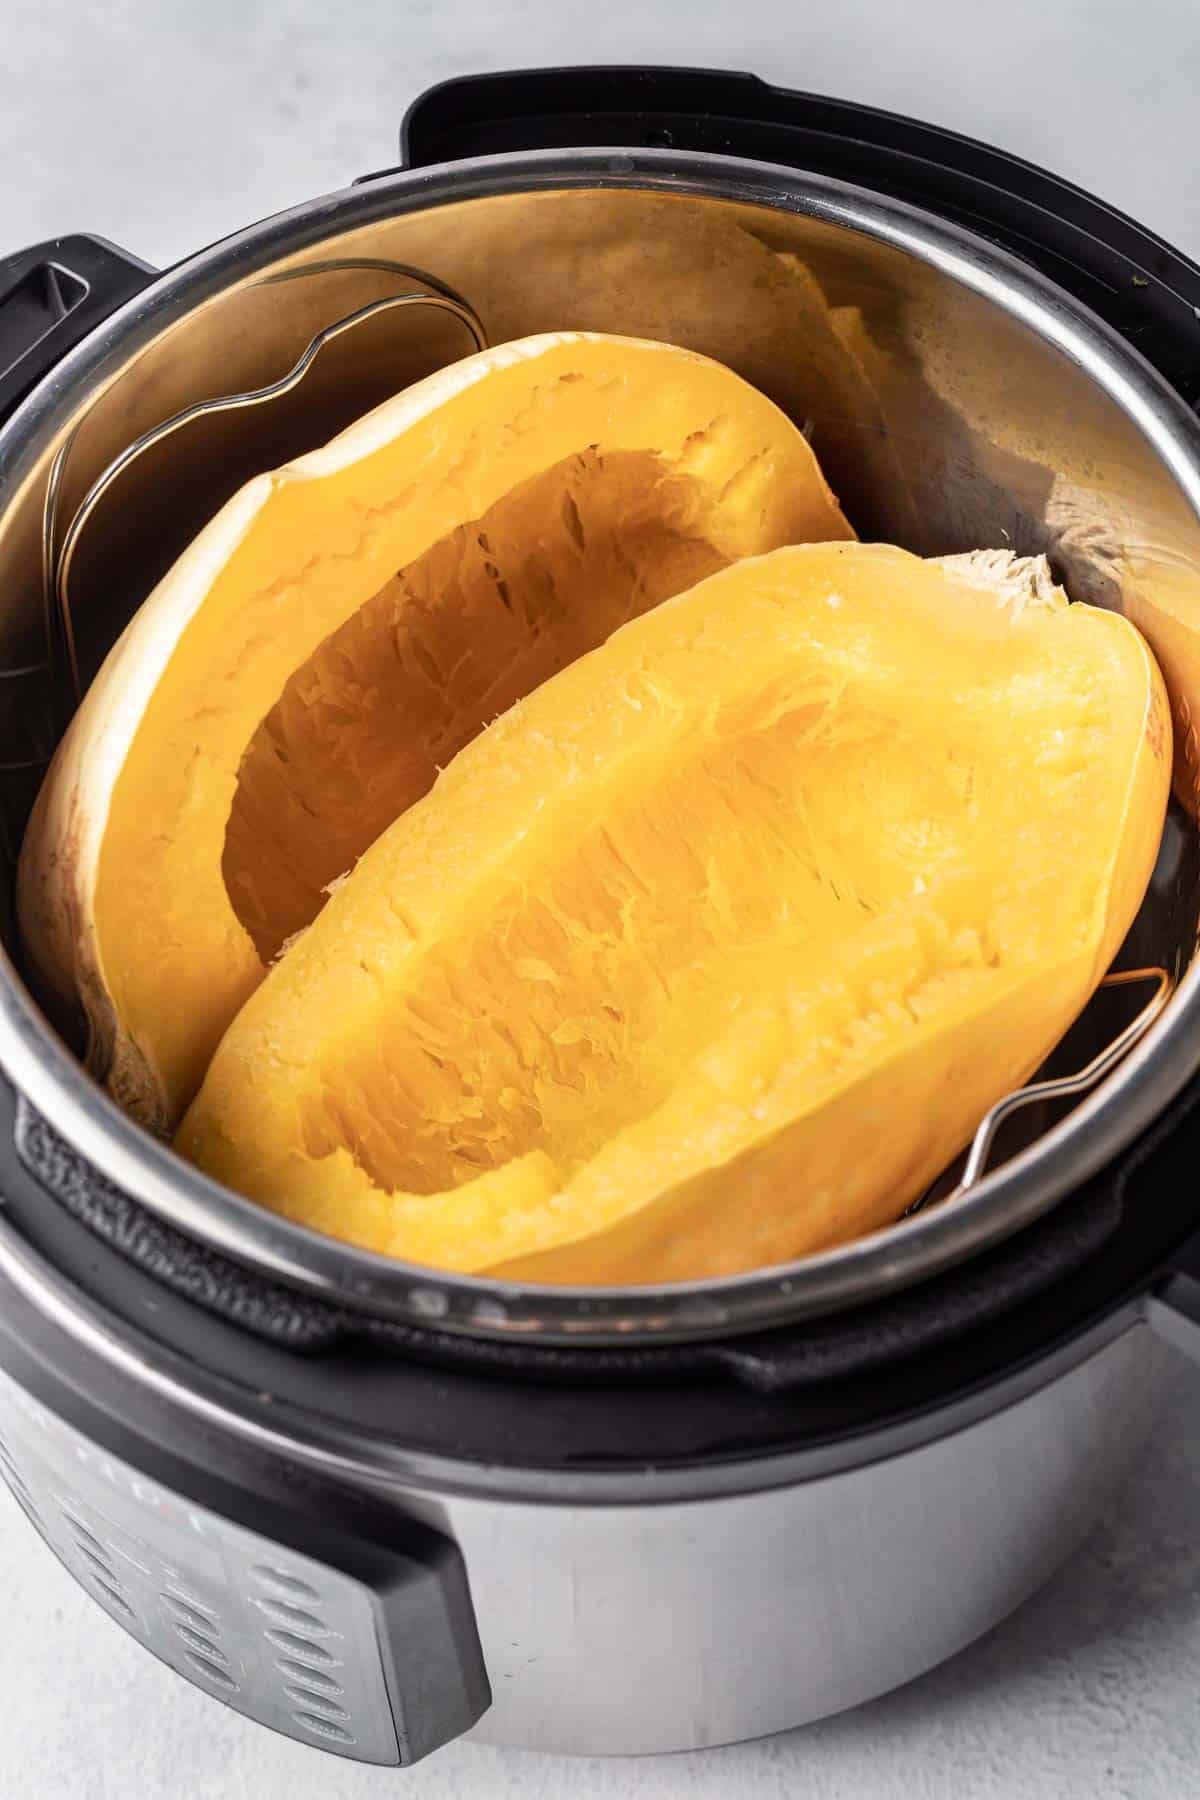 Cooked squash.